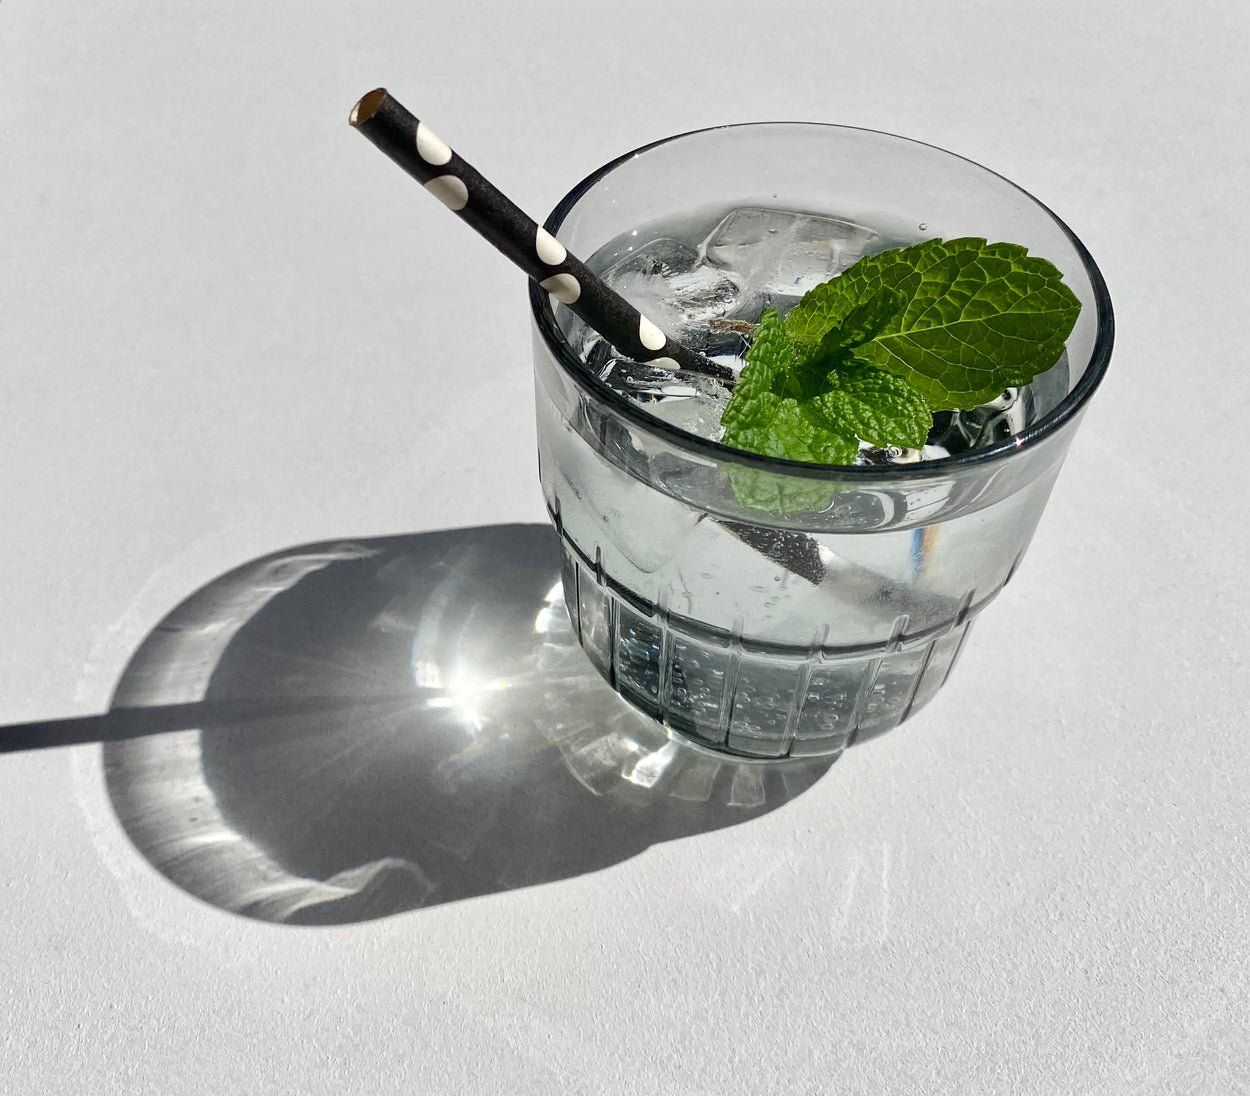 Smokey Grey Portuguese glass with polka dot straw and mint leaf in water with white background.